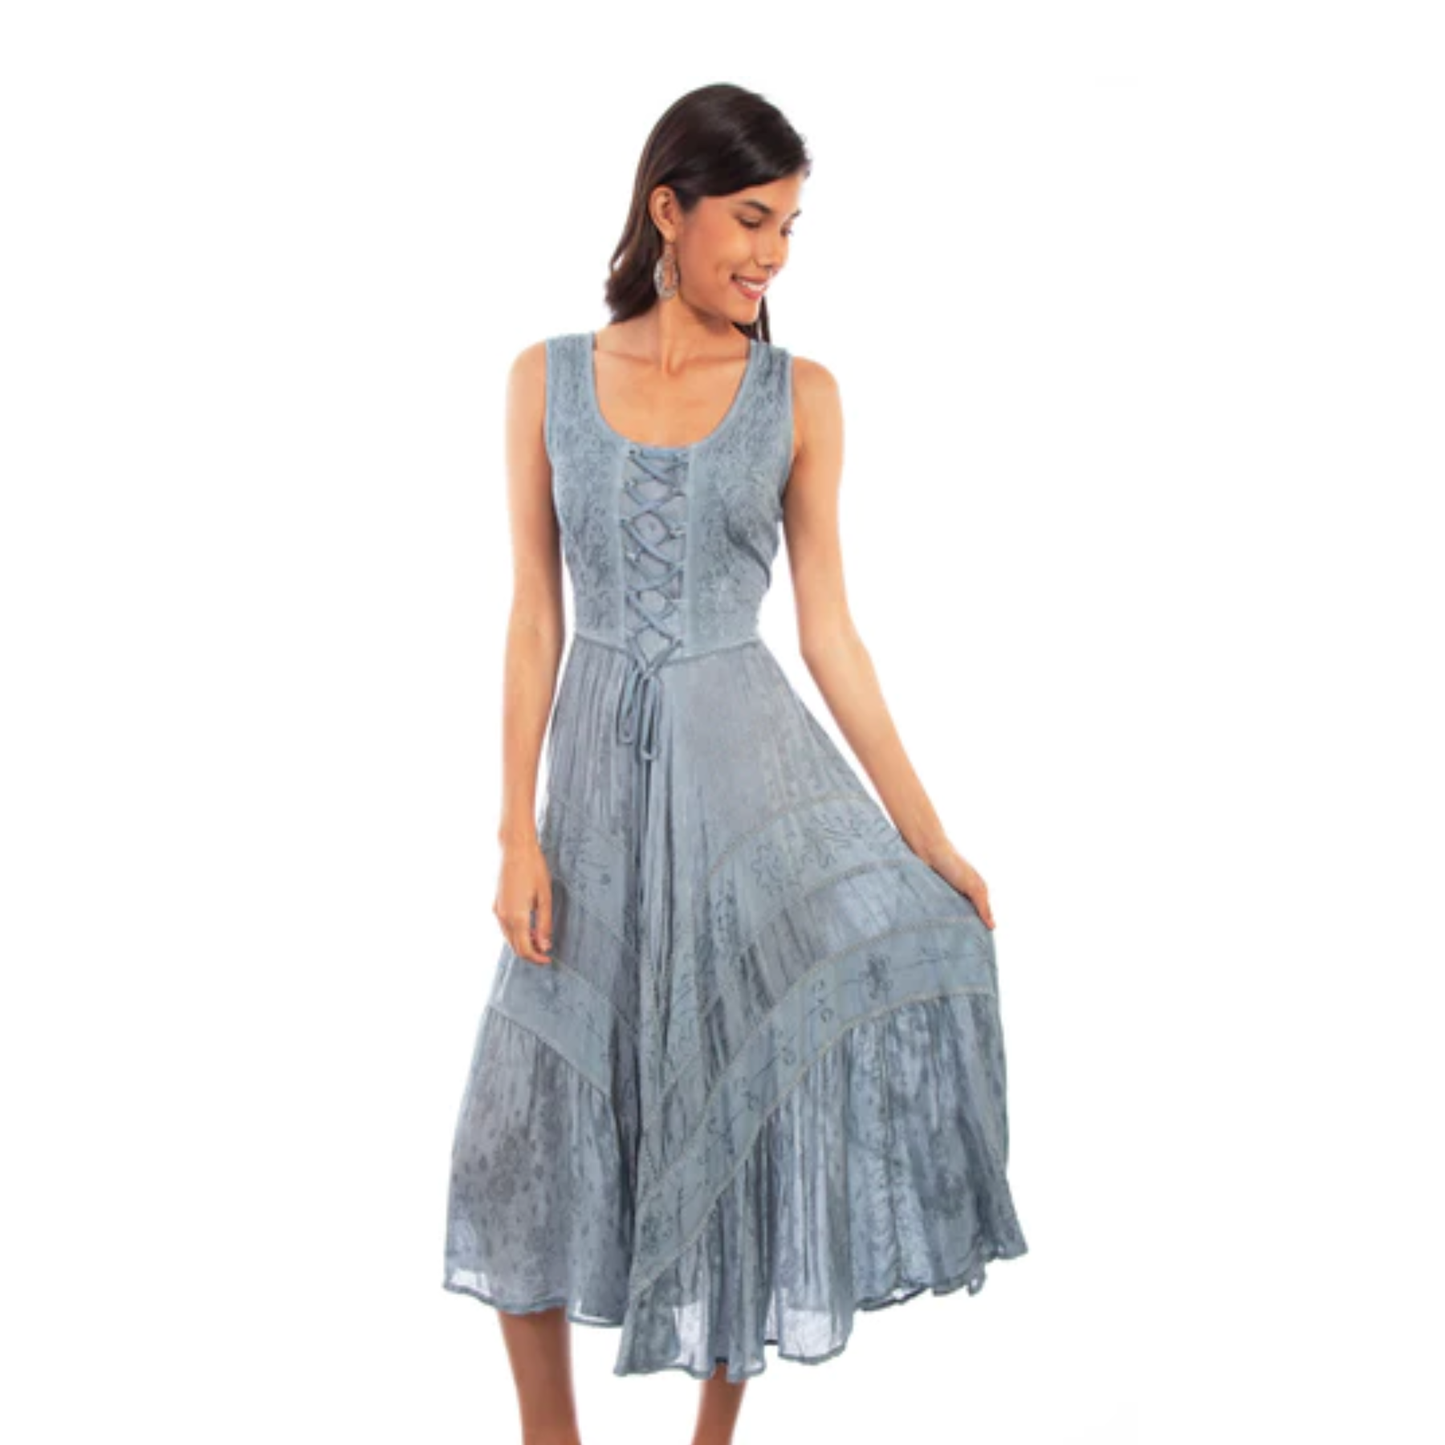 Scully® Ladies Ash Grey Lace Up Peasant Tiered Dress HC118-ASG